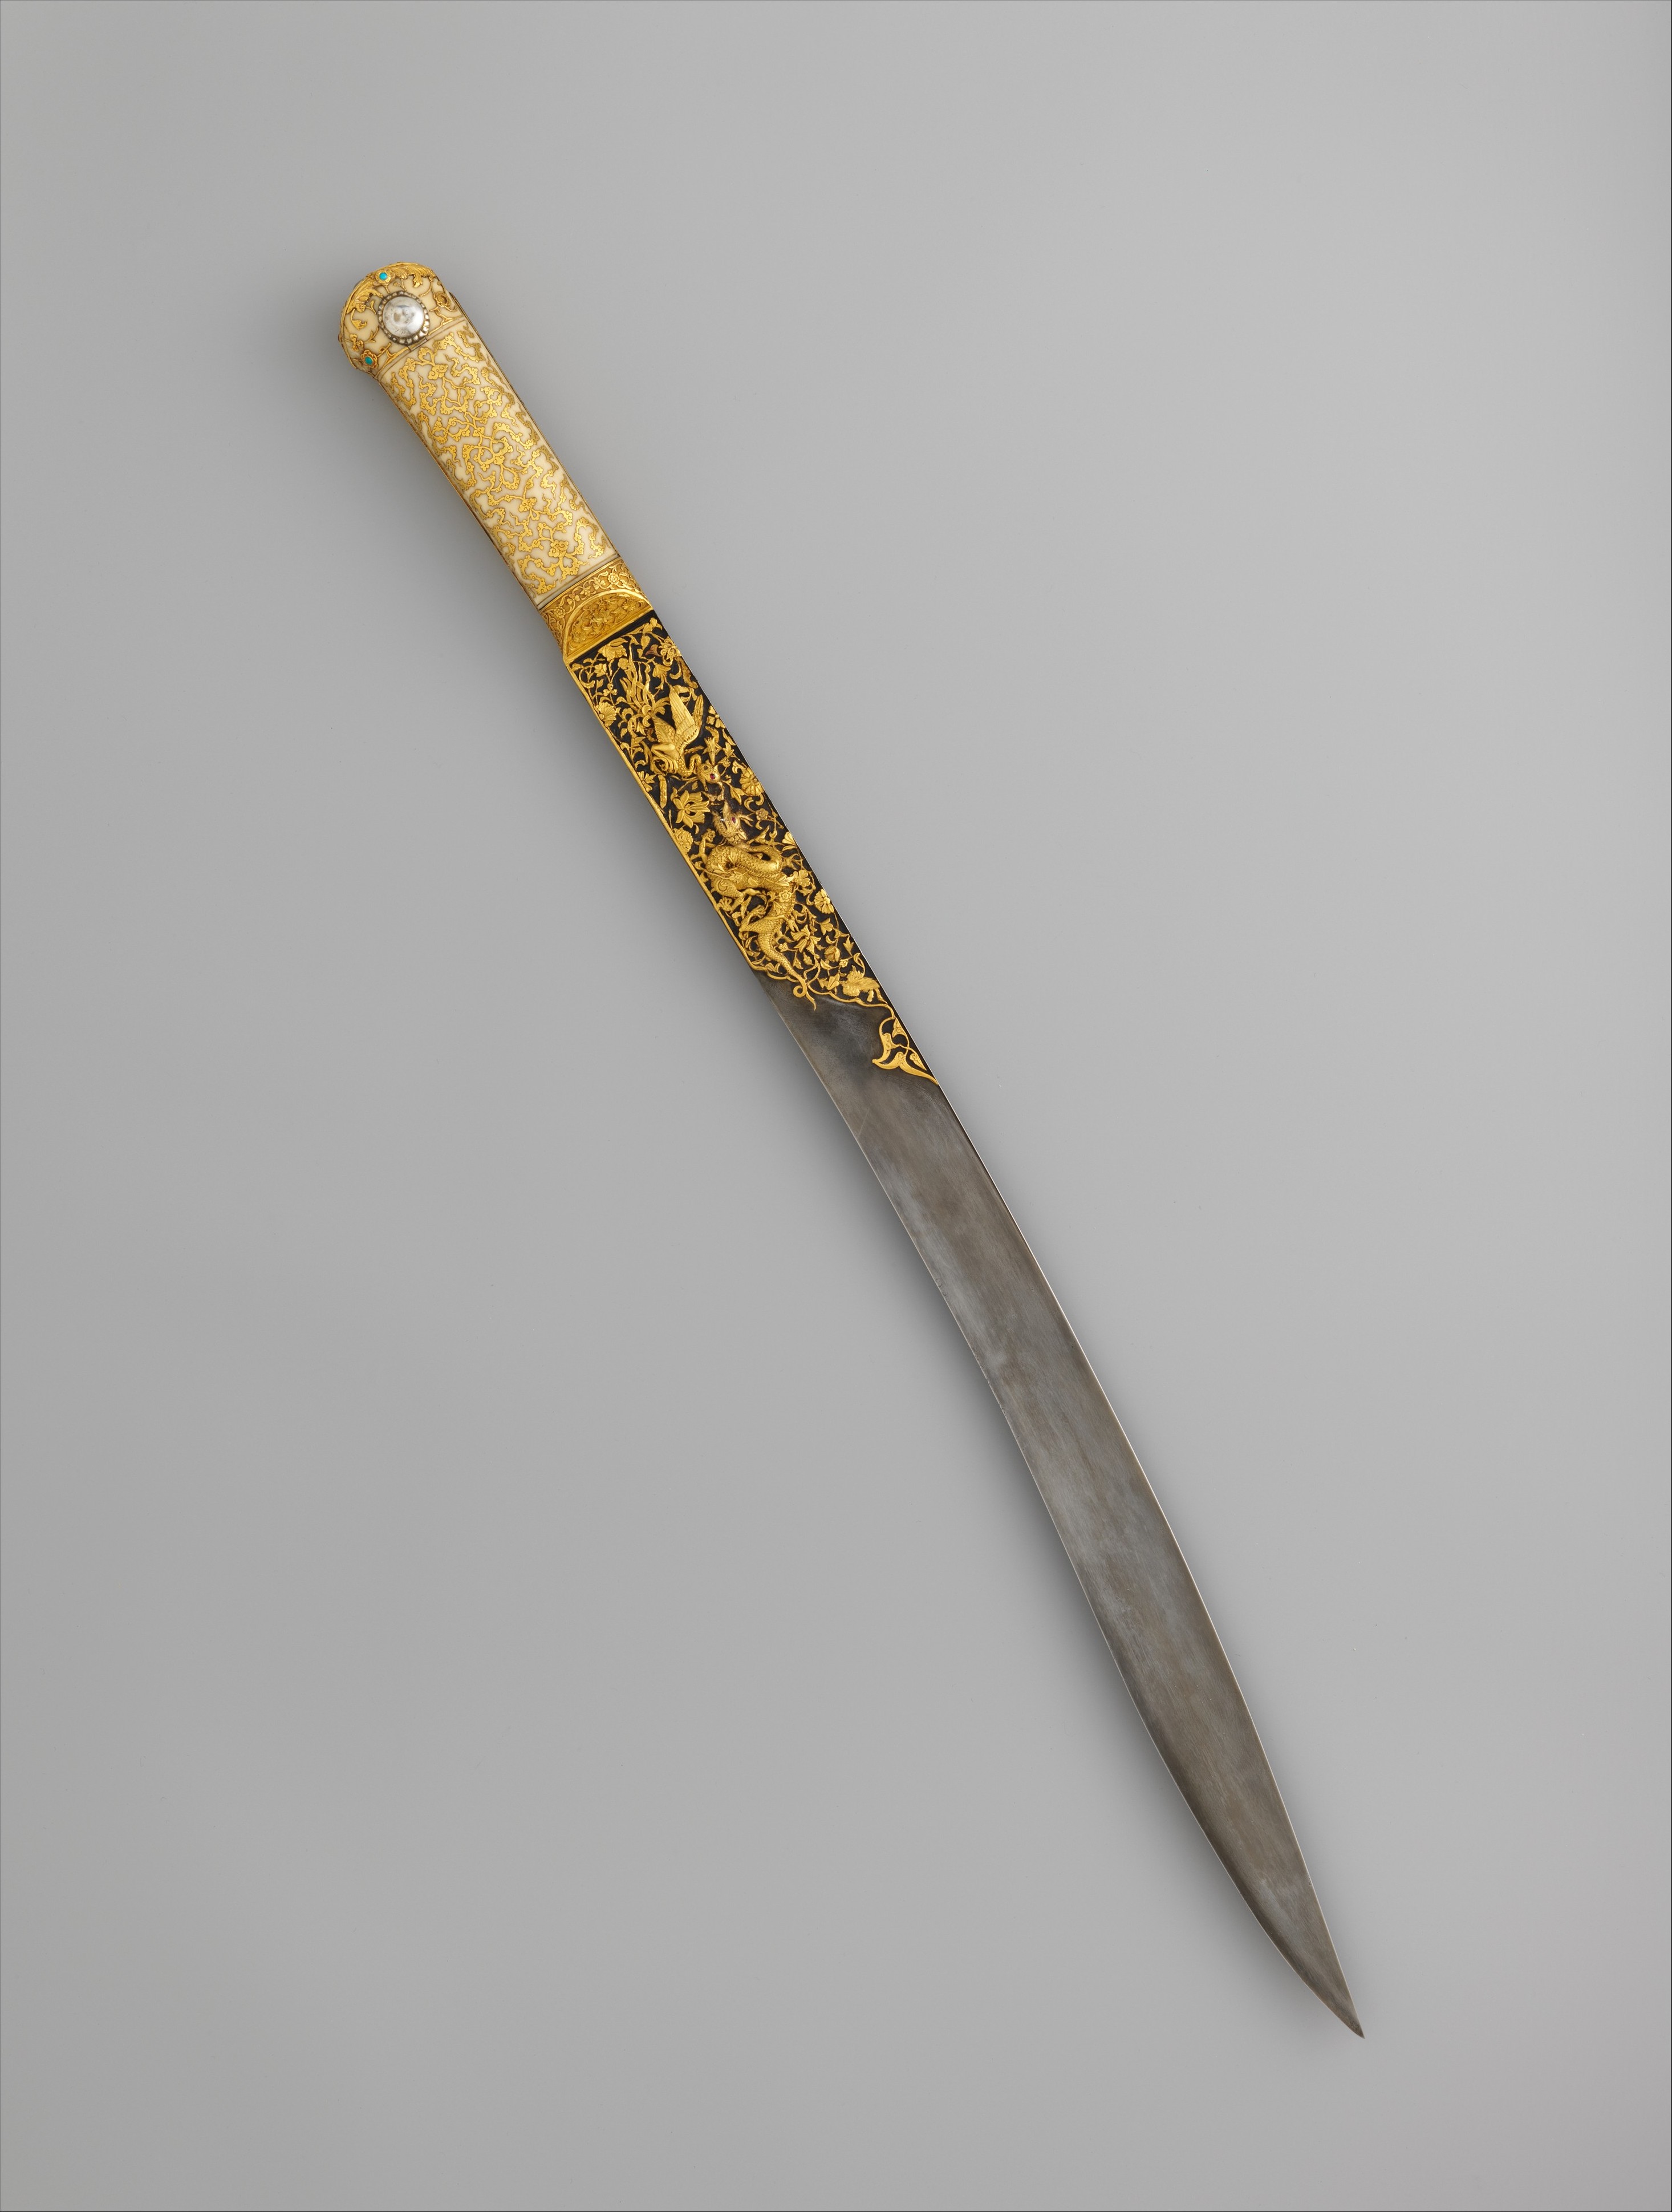 Workshop of Ahmed Tekelü, Short Sword (Yatagan) from the Court of Süleyman  the Magnificent (reigned 1520–66), Turkish, Istanbul